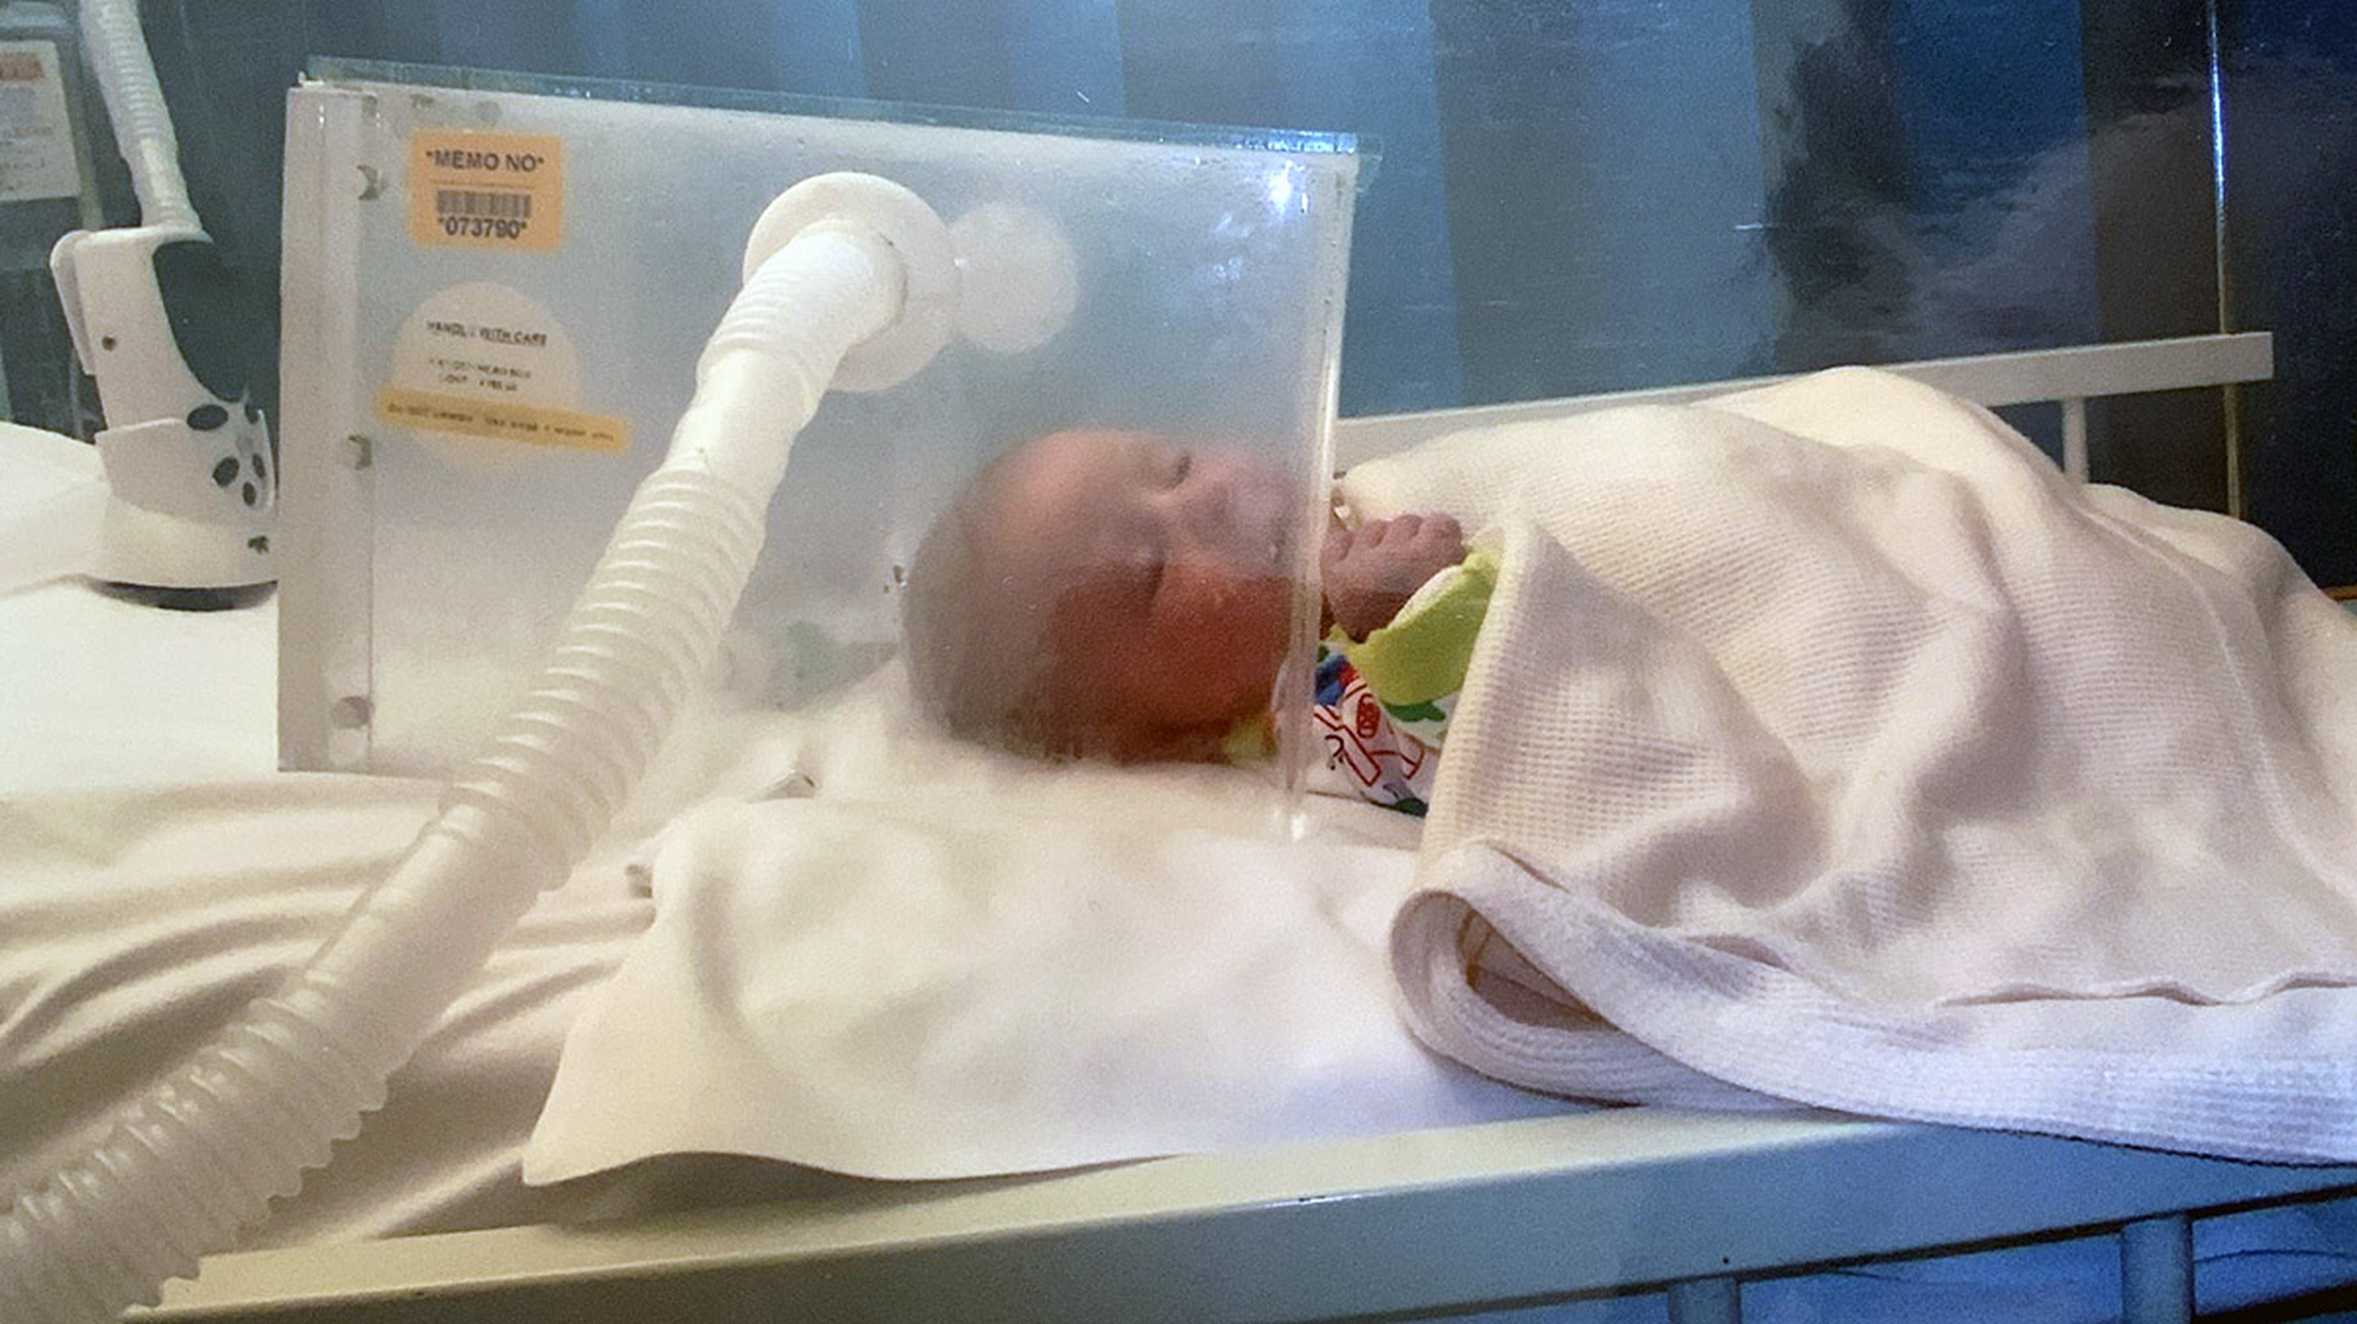 Archie as a baby, on an incubator during treatment in hospital for his condition.